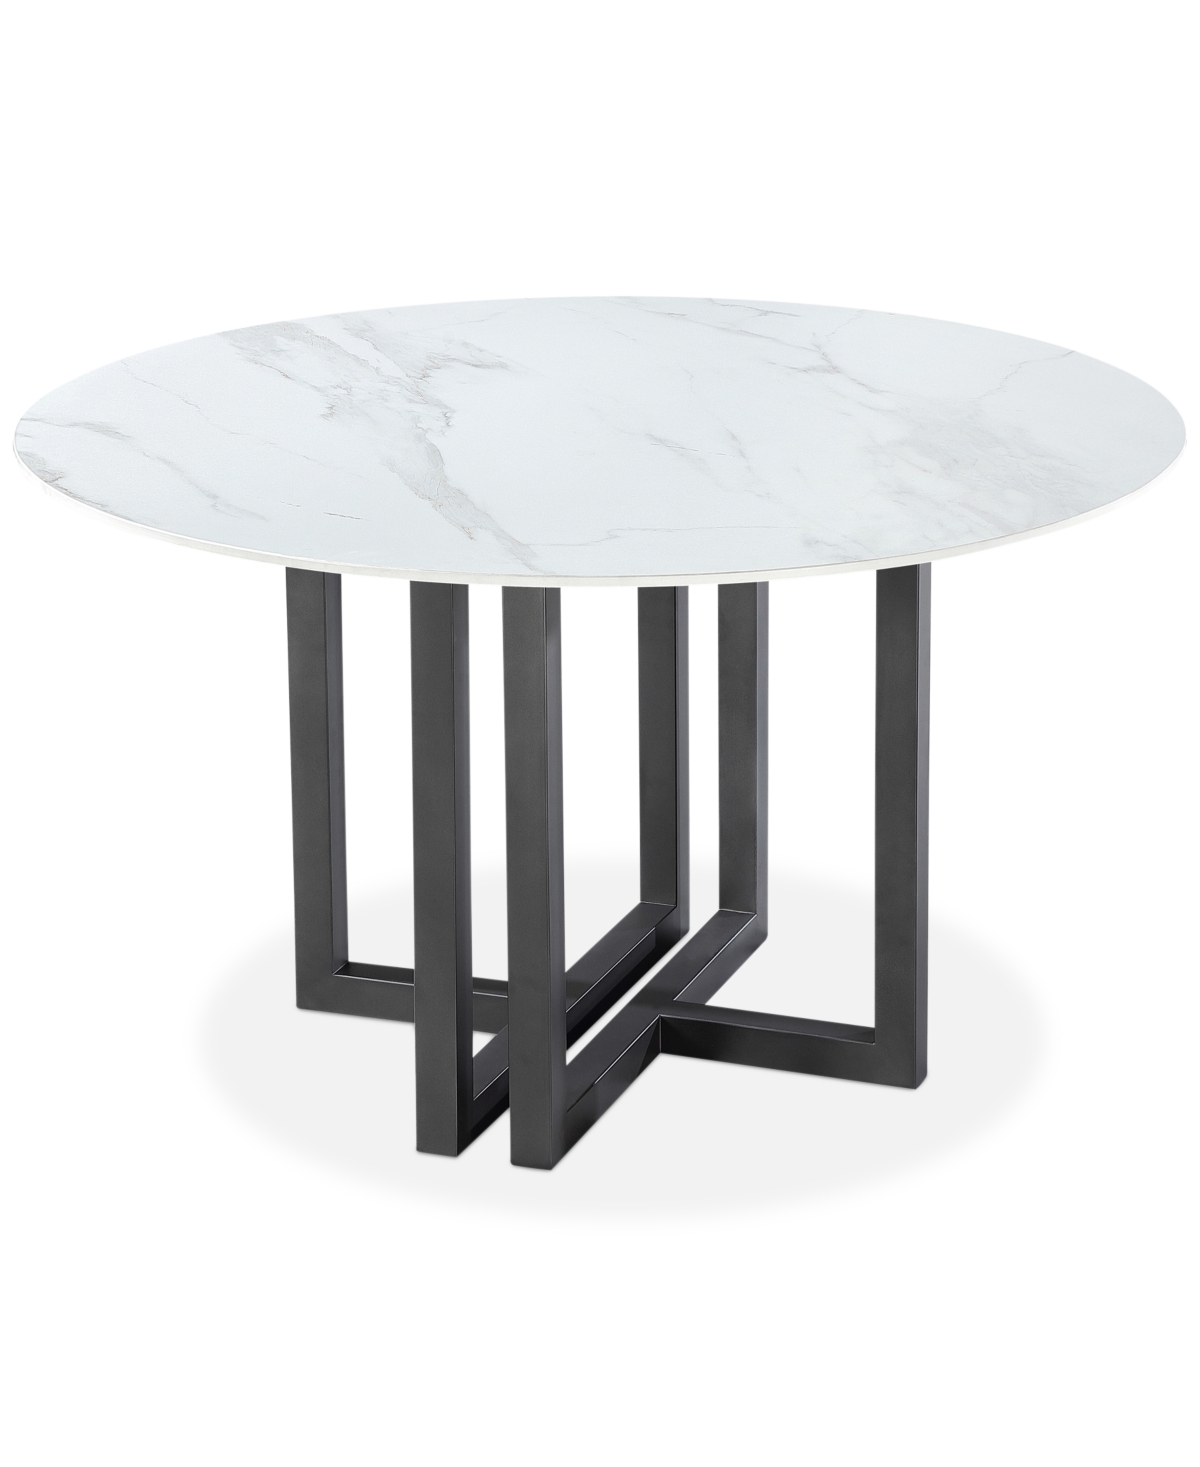 Furniture Emila 54" Round Sintered Stone Mix And Match Dining Table, Created For Macy's In White Sintered Stone With Black Base